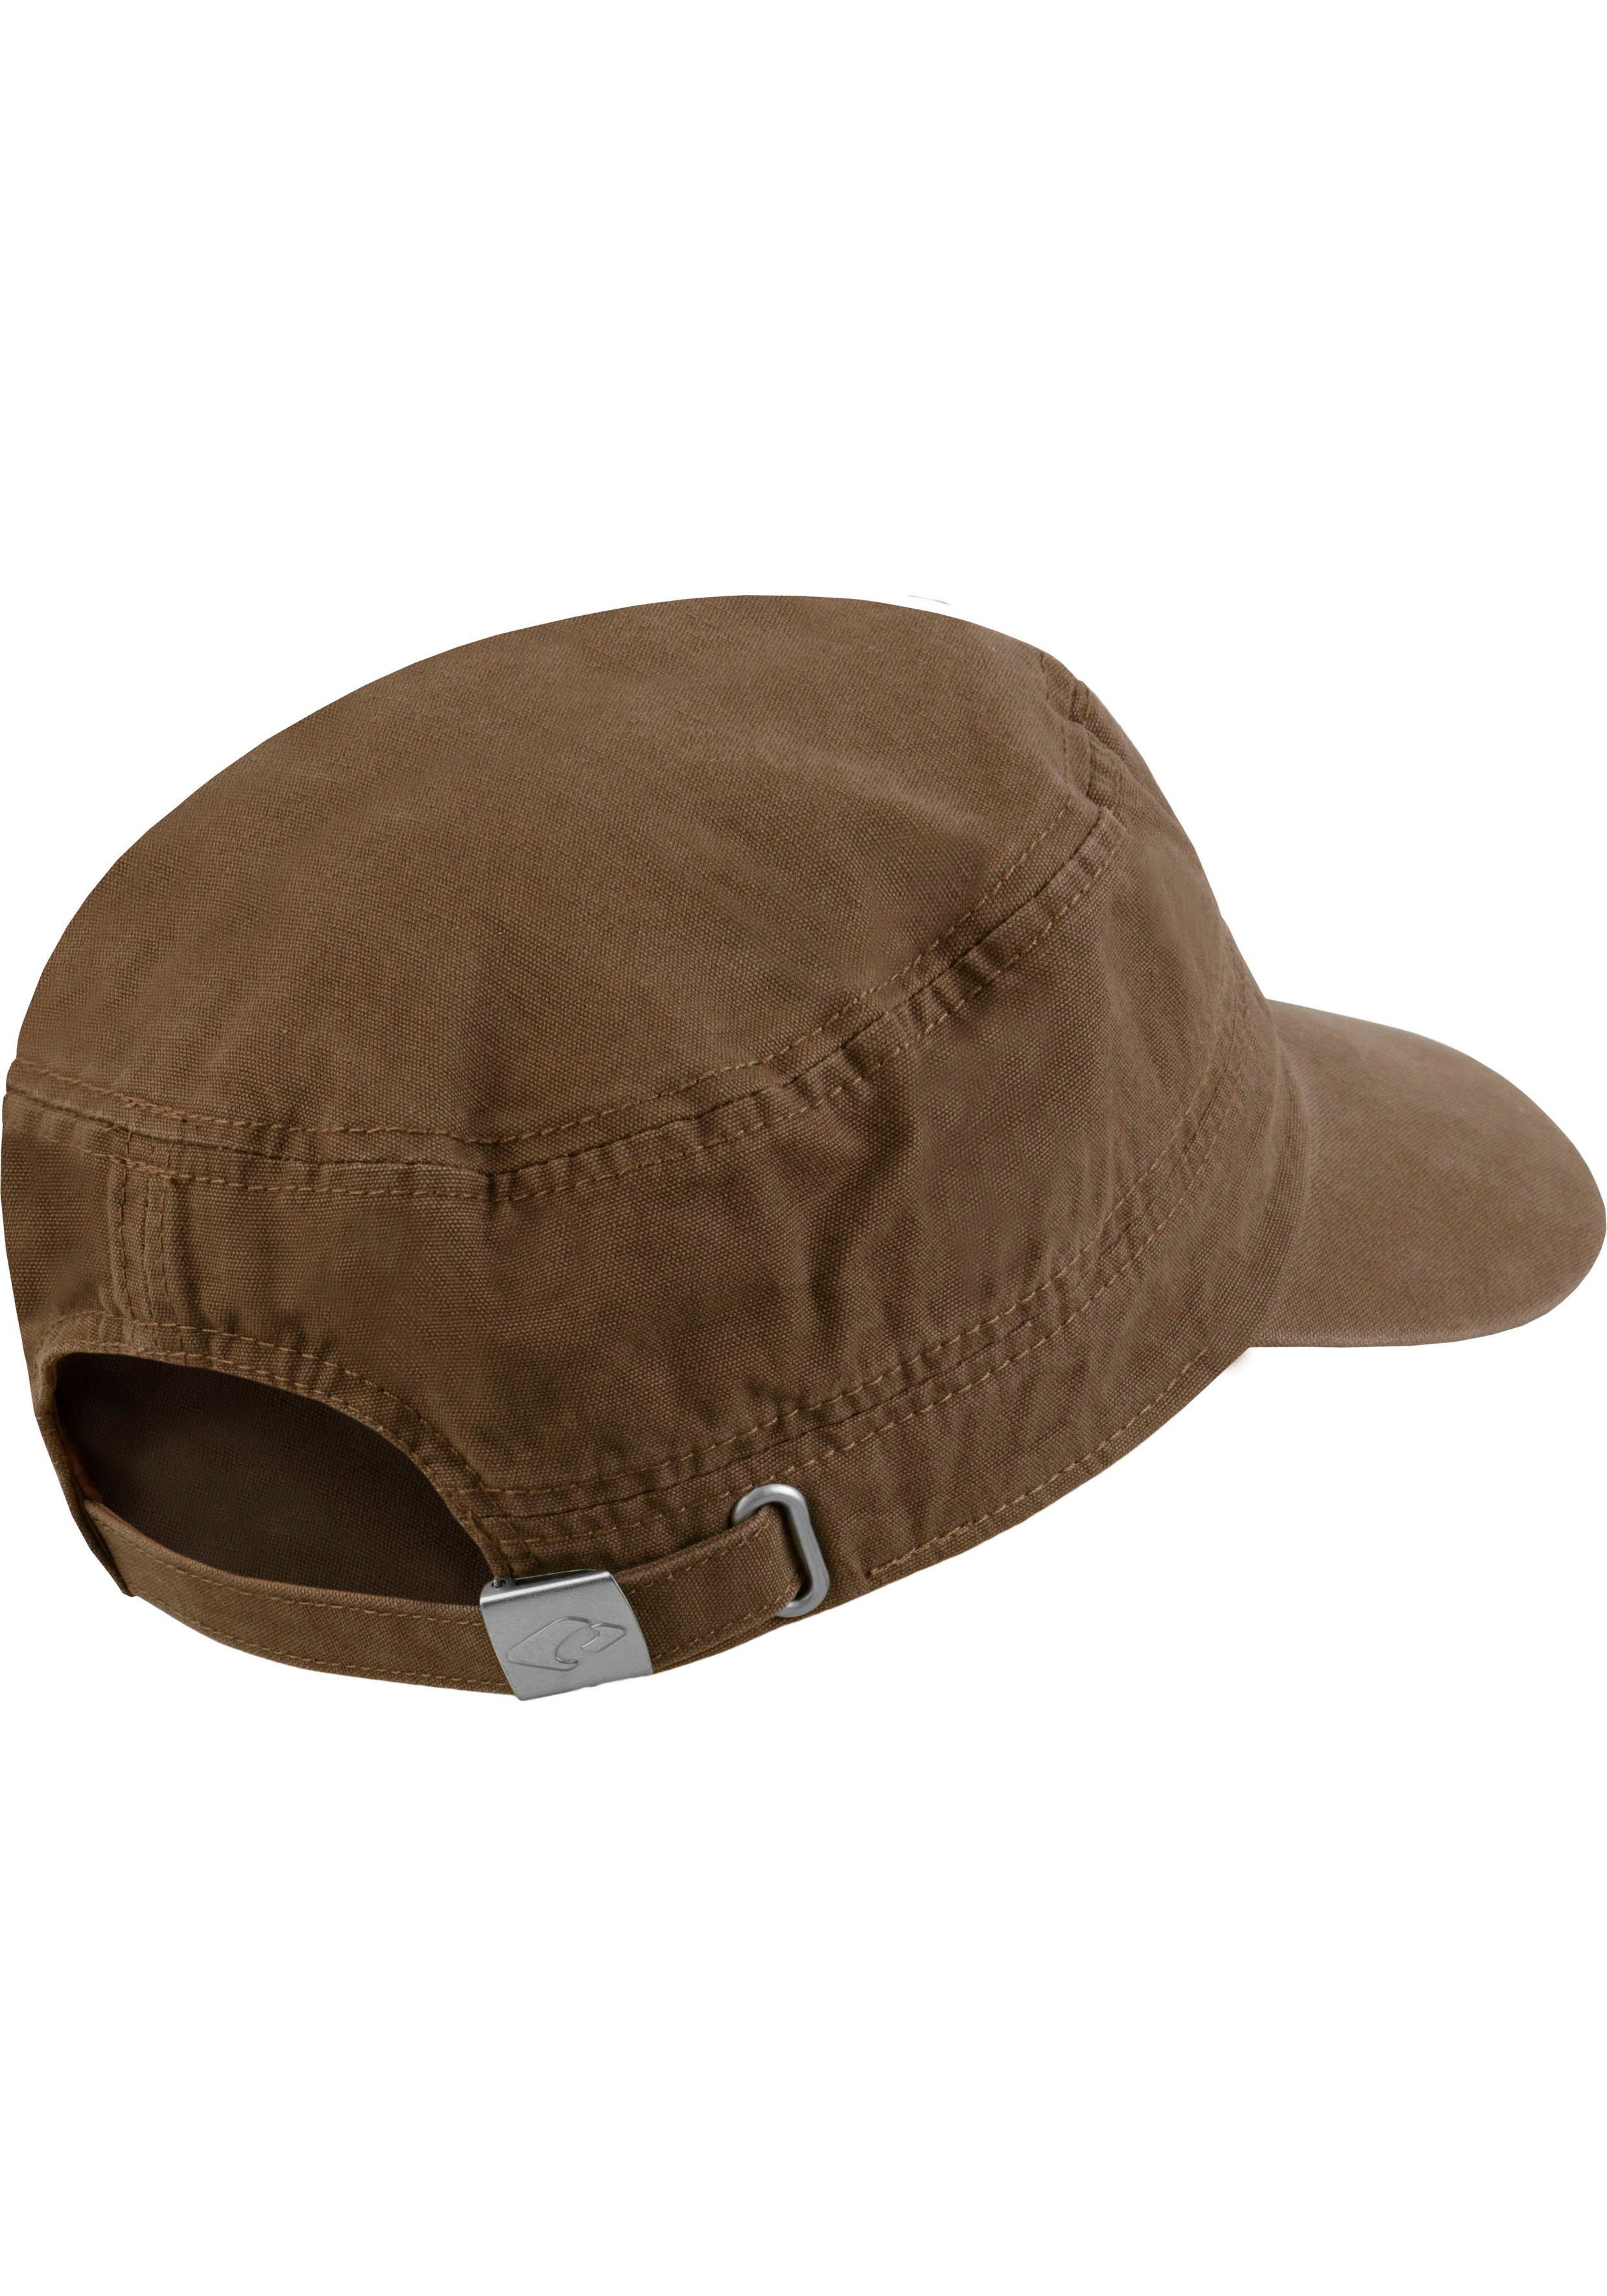 Cap Cap Army Dublin im braun Mililtary-Style chillouts Hat